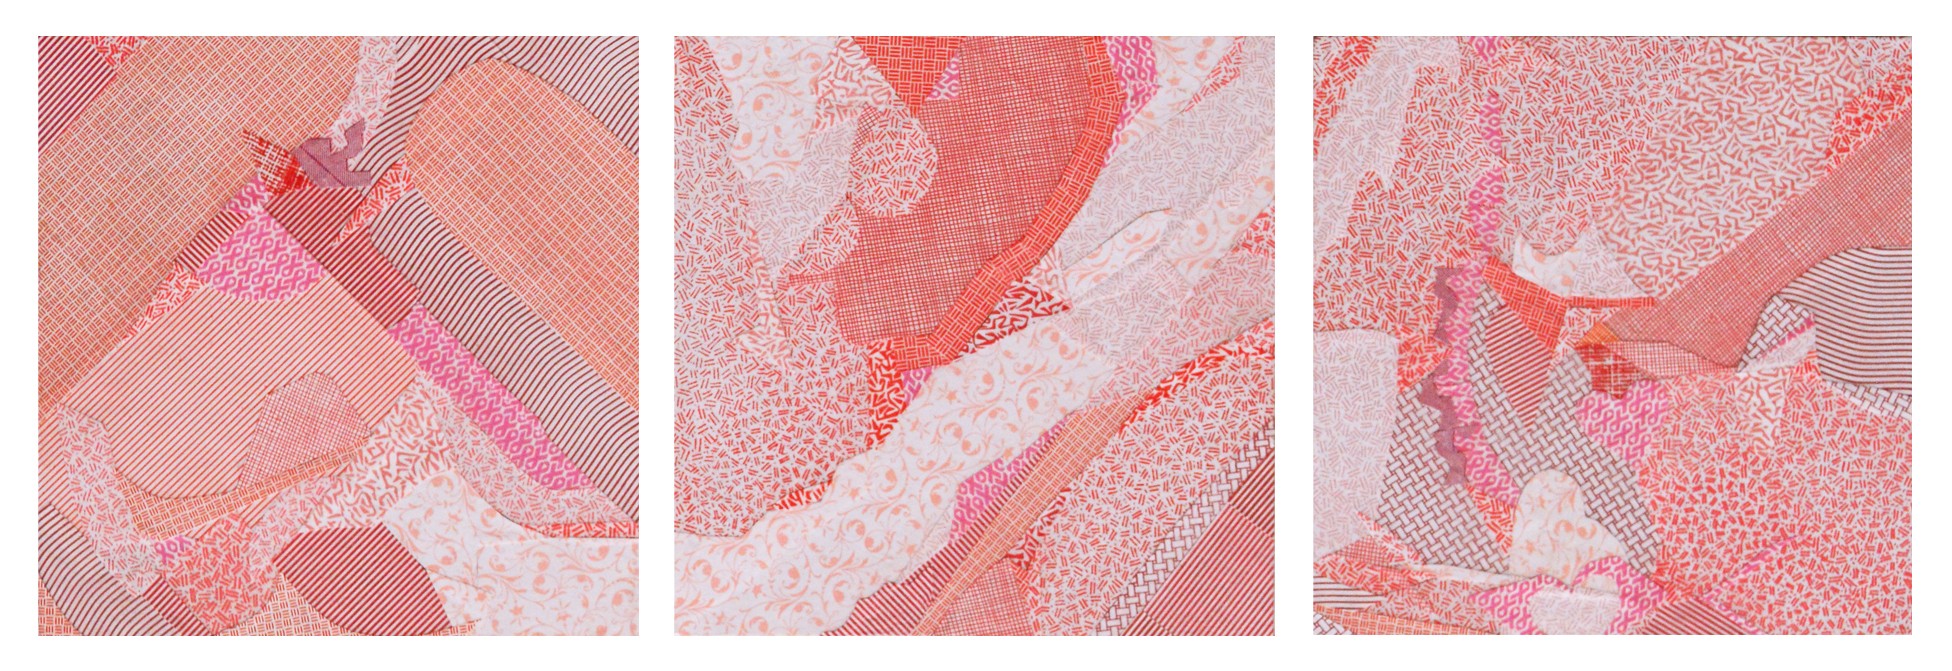 "PINK," Privacy Envelopes and Glitter on Panel, 6x19 inches, 2015